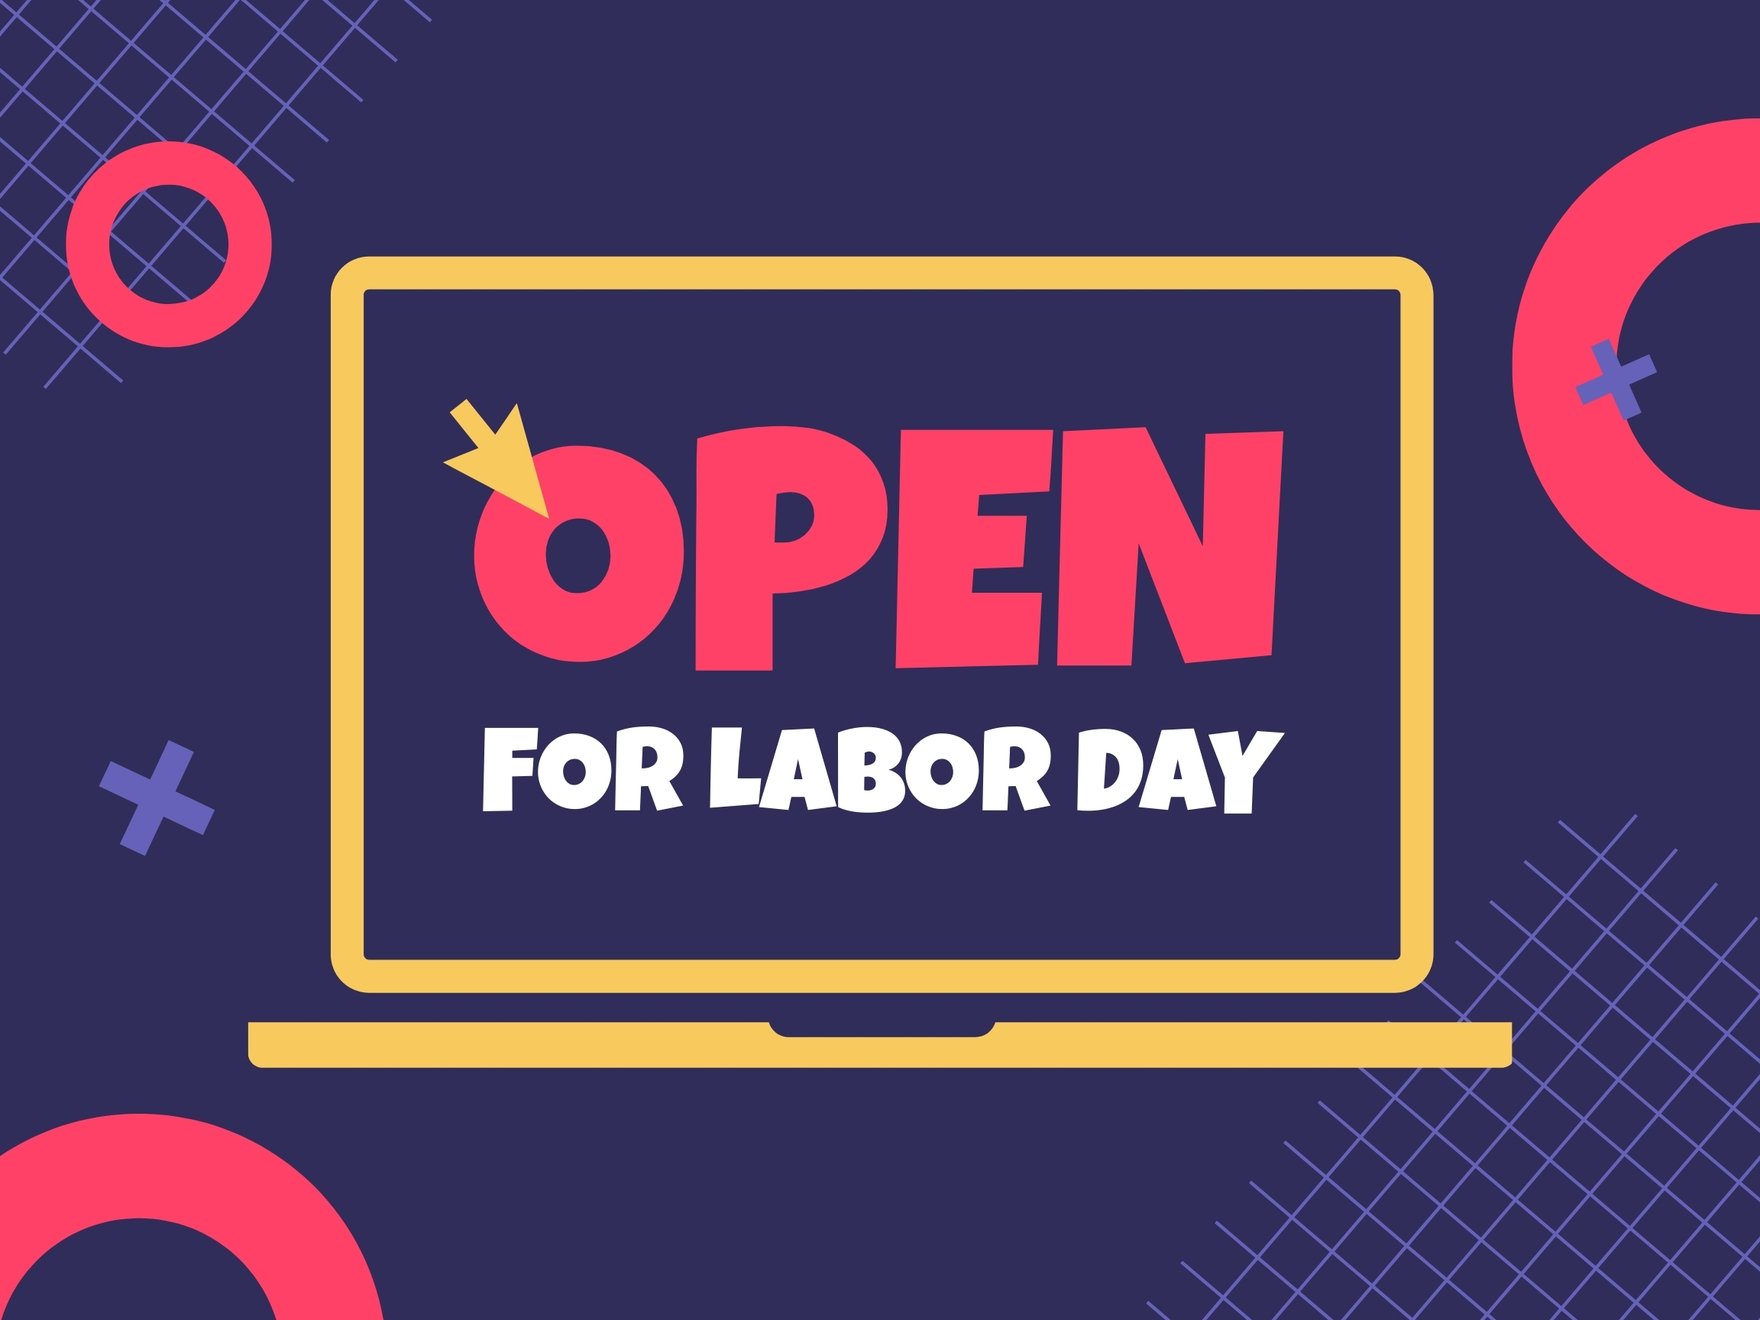 Free Open For Labor Day Sign Download in PNG, JPG